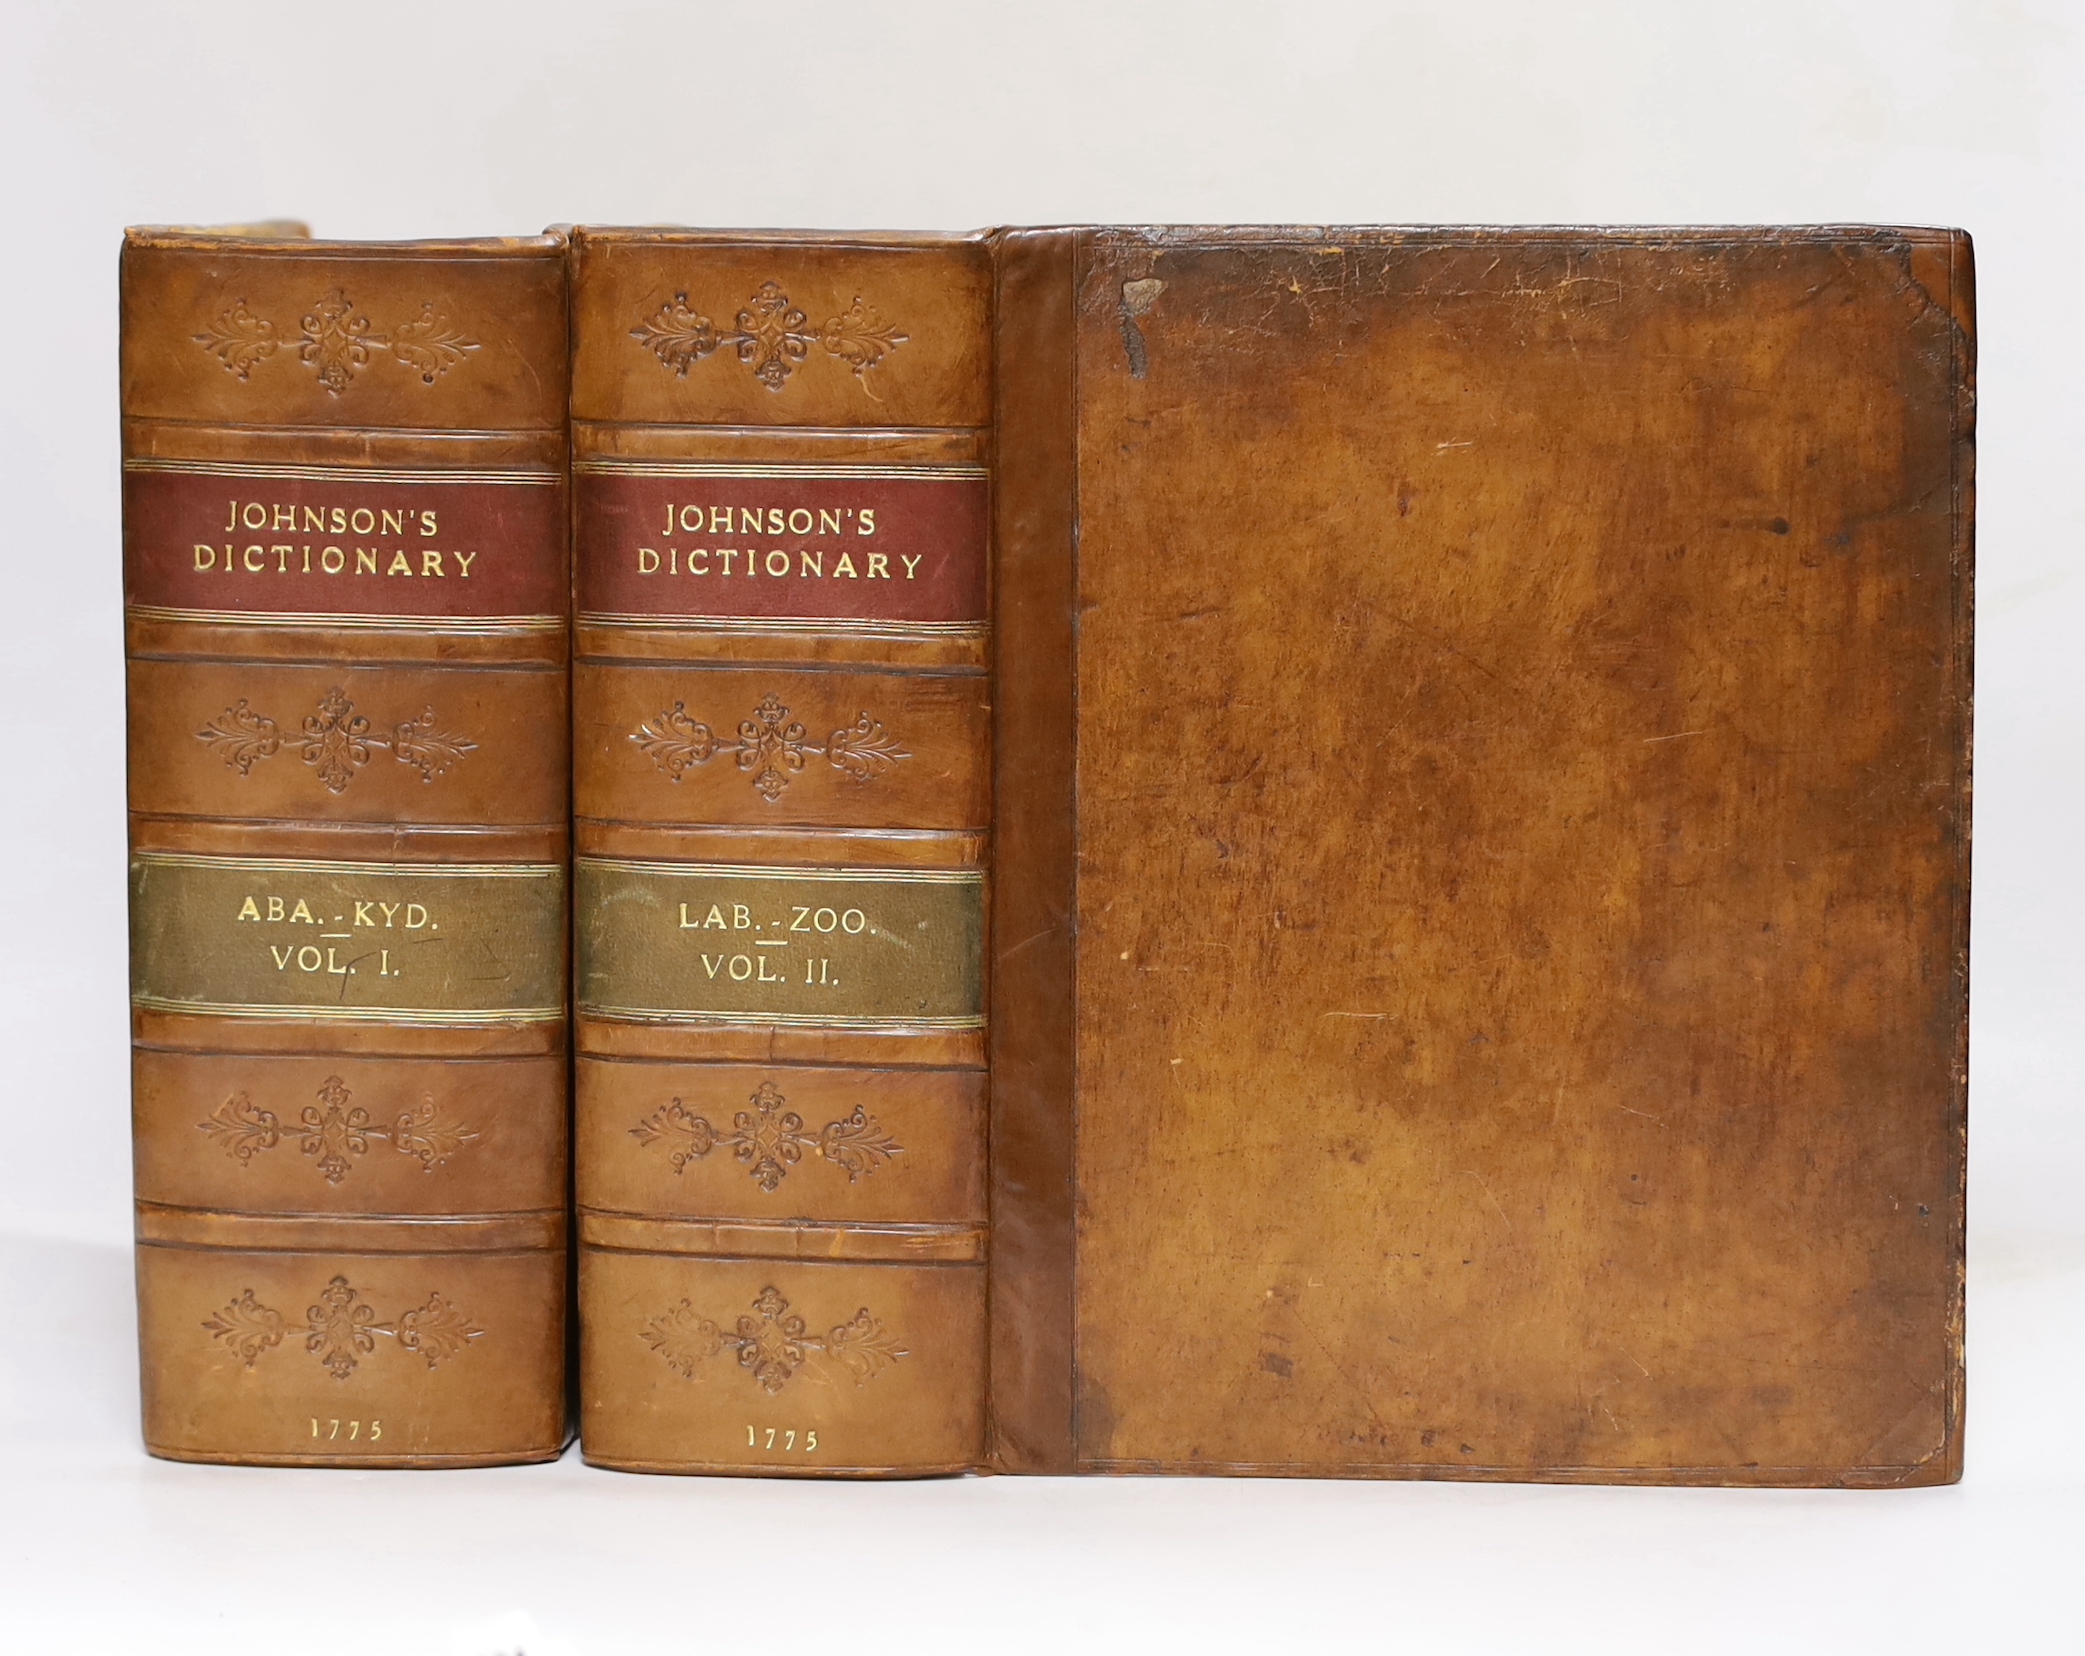 Johnson, Samuel - A Dictionary of the English Language....to which are prefixed, a History of the Language, and an English Grammar. 4th edition, revised by the author, 2 vols. old calf, newly rebacked with blind decorate